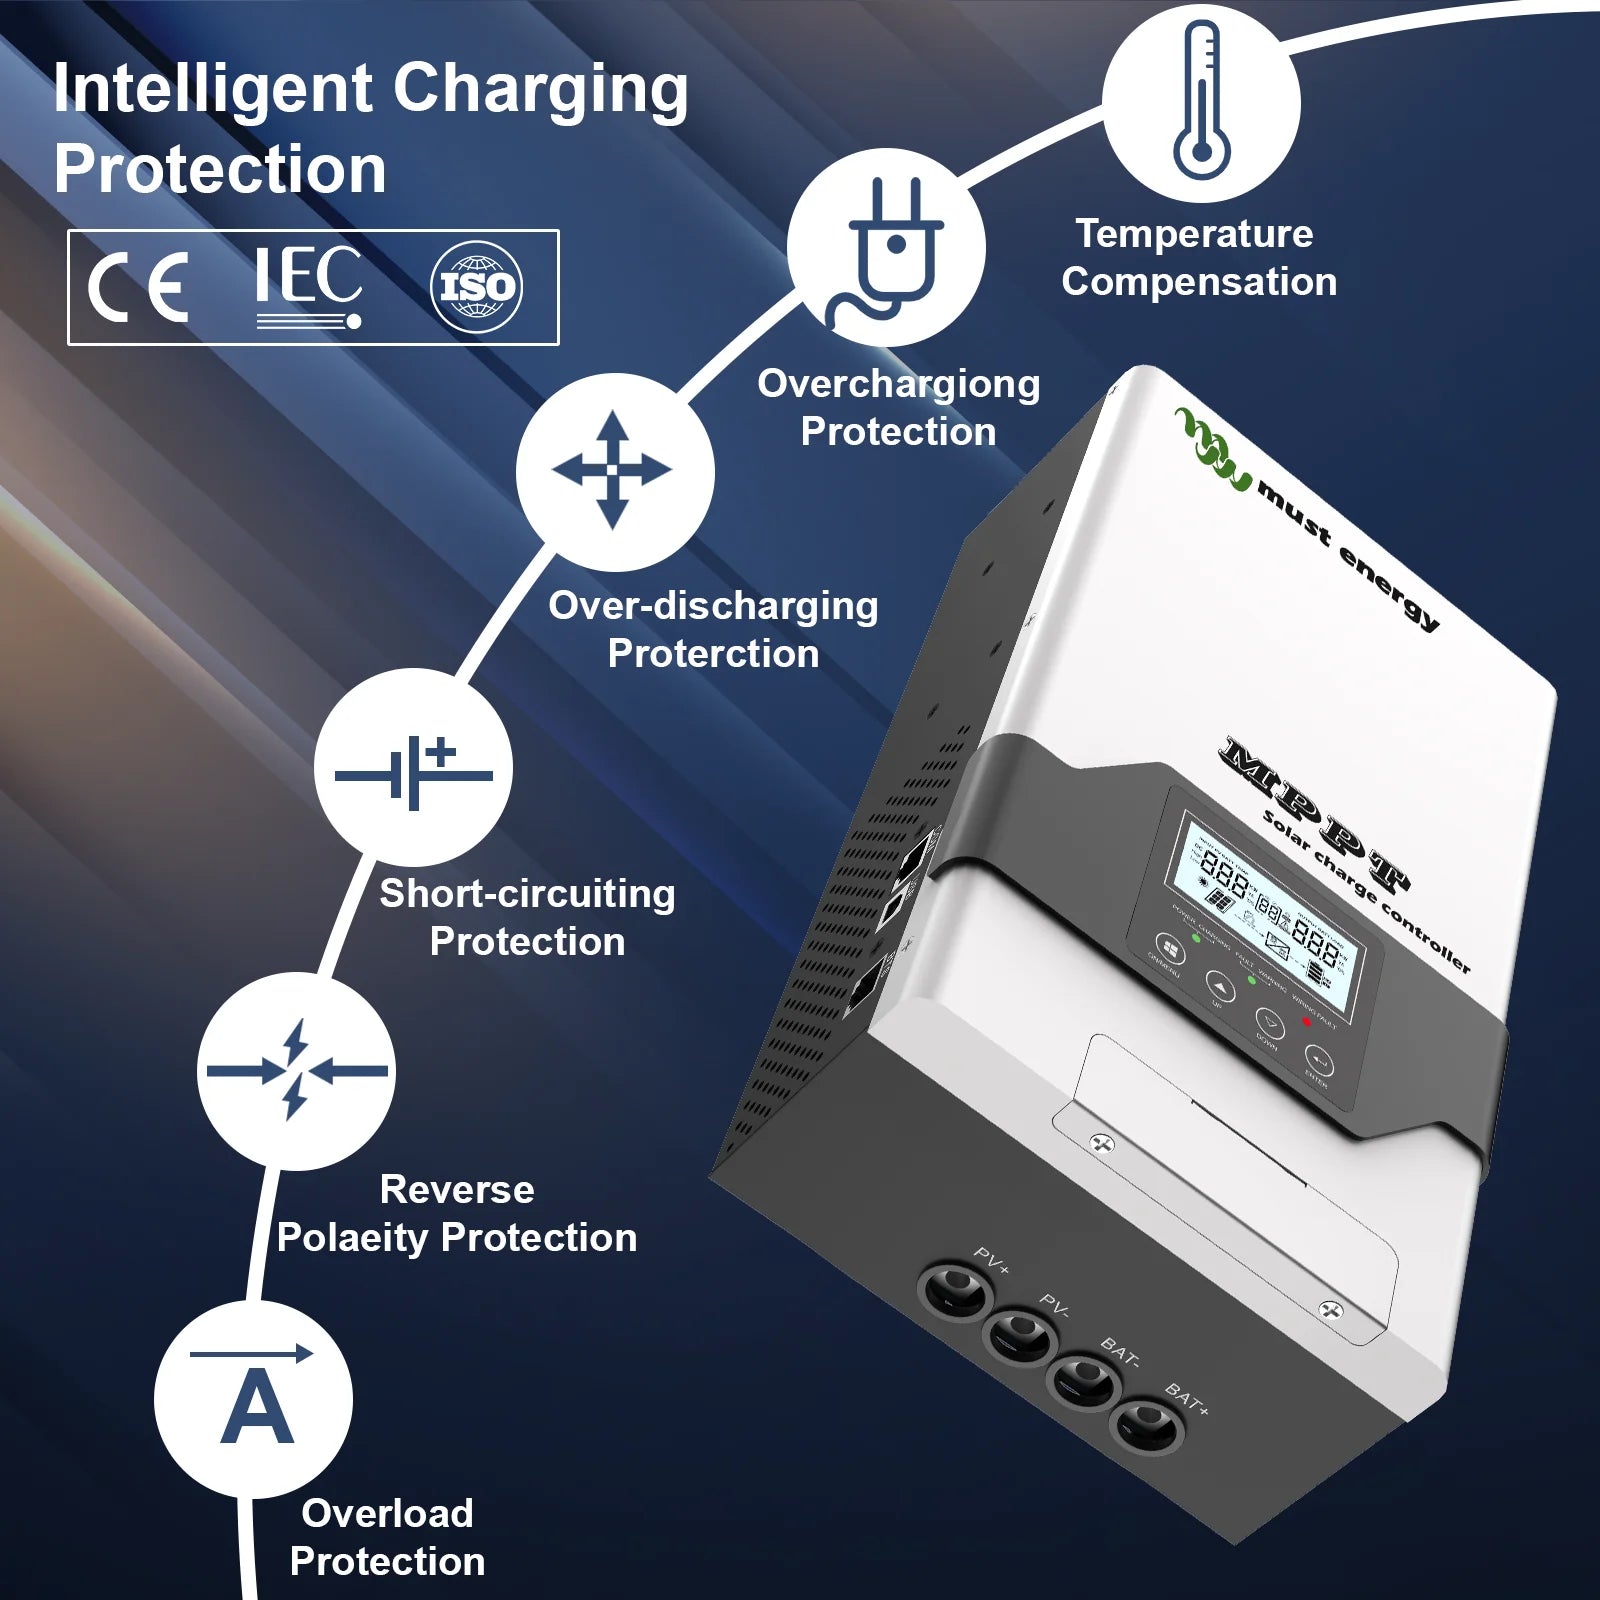 MUST ENERGY 80A 100A MPPT Solar Charge Controller, Solar charger controller with intelligent protection features for safe charging of MPPT solar panels.